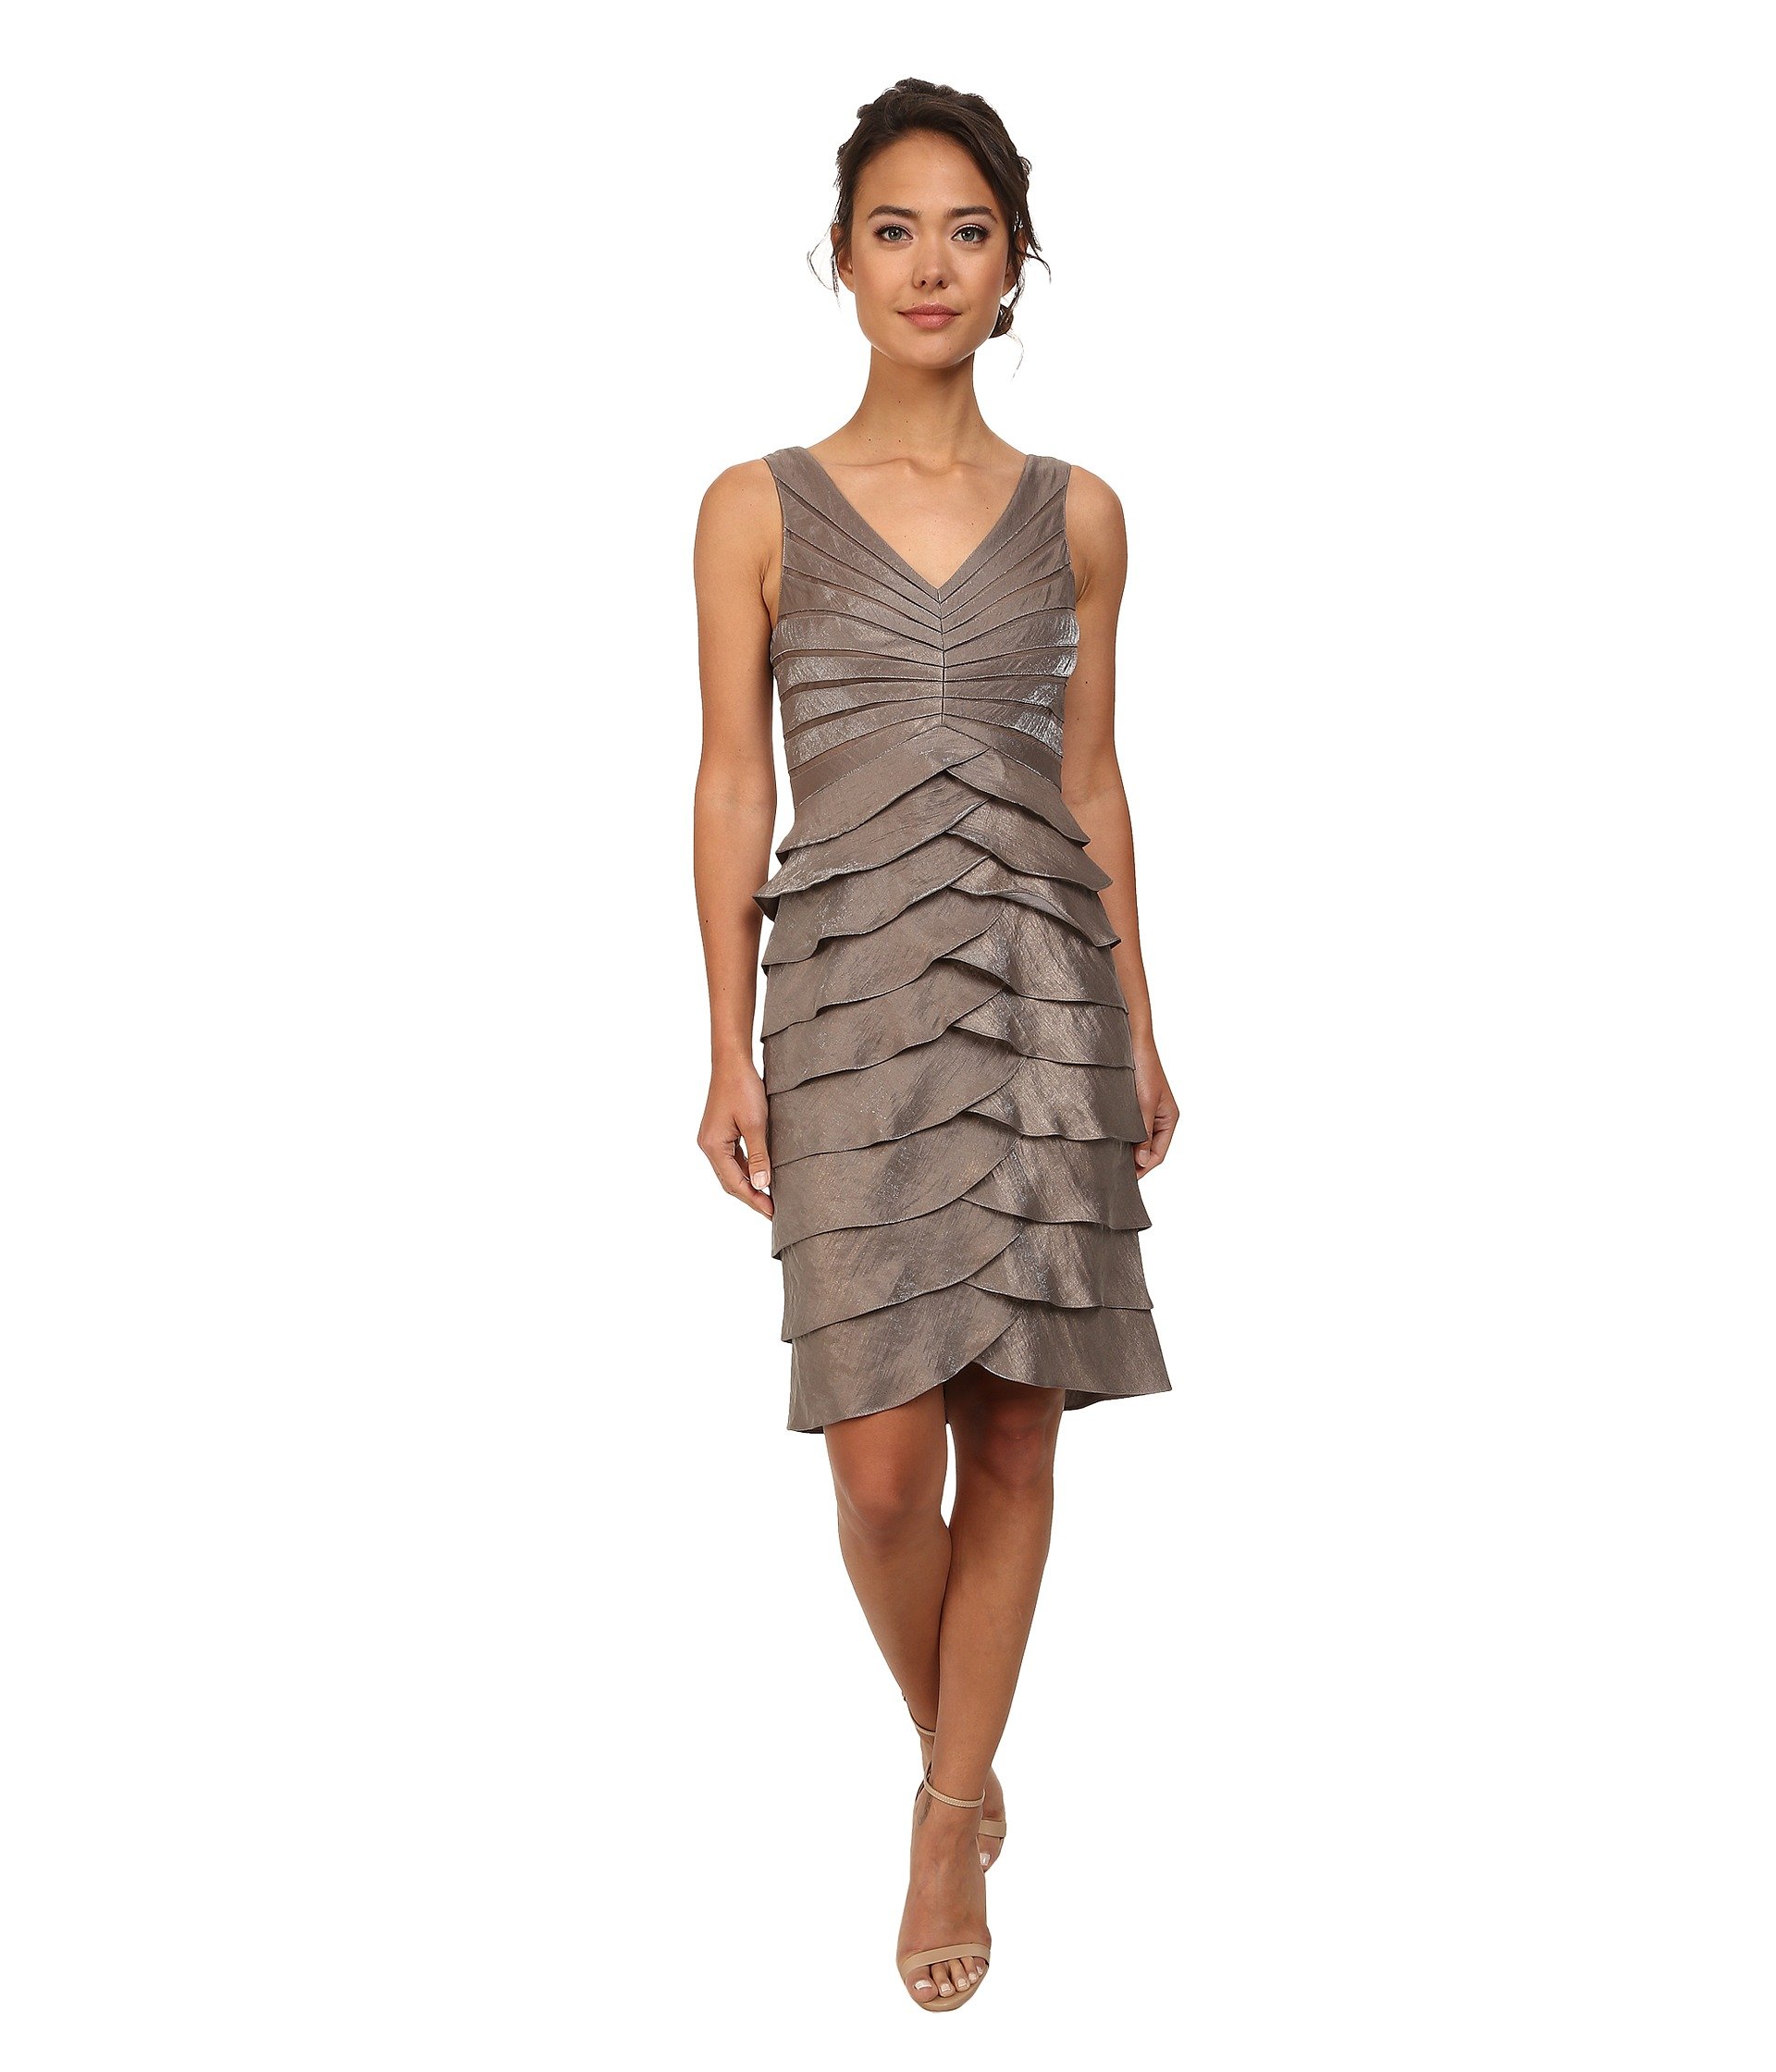 Adrianna Papell Synthetic Shutter Pleat Dress W/ Jacket in Gray - Lyst